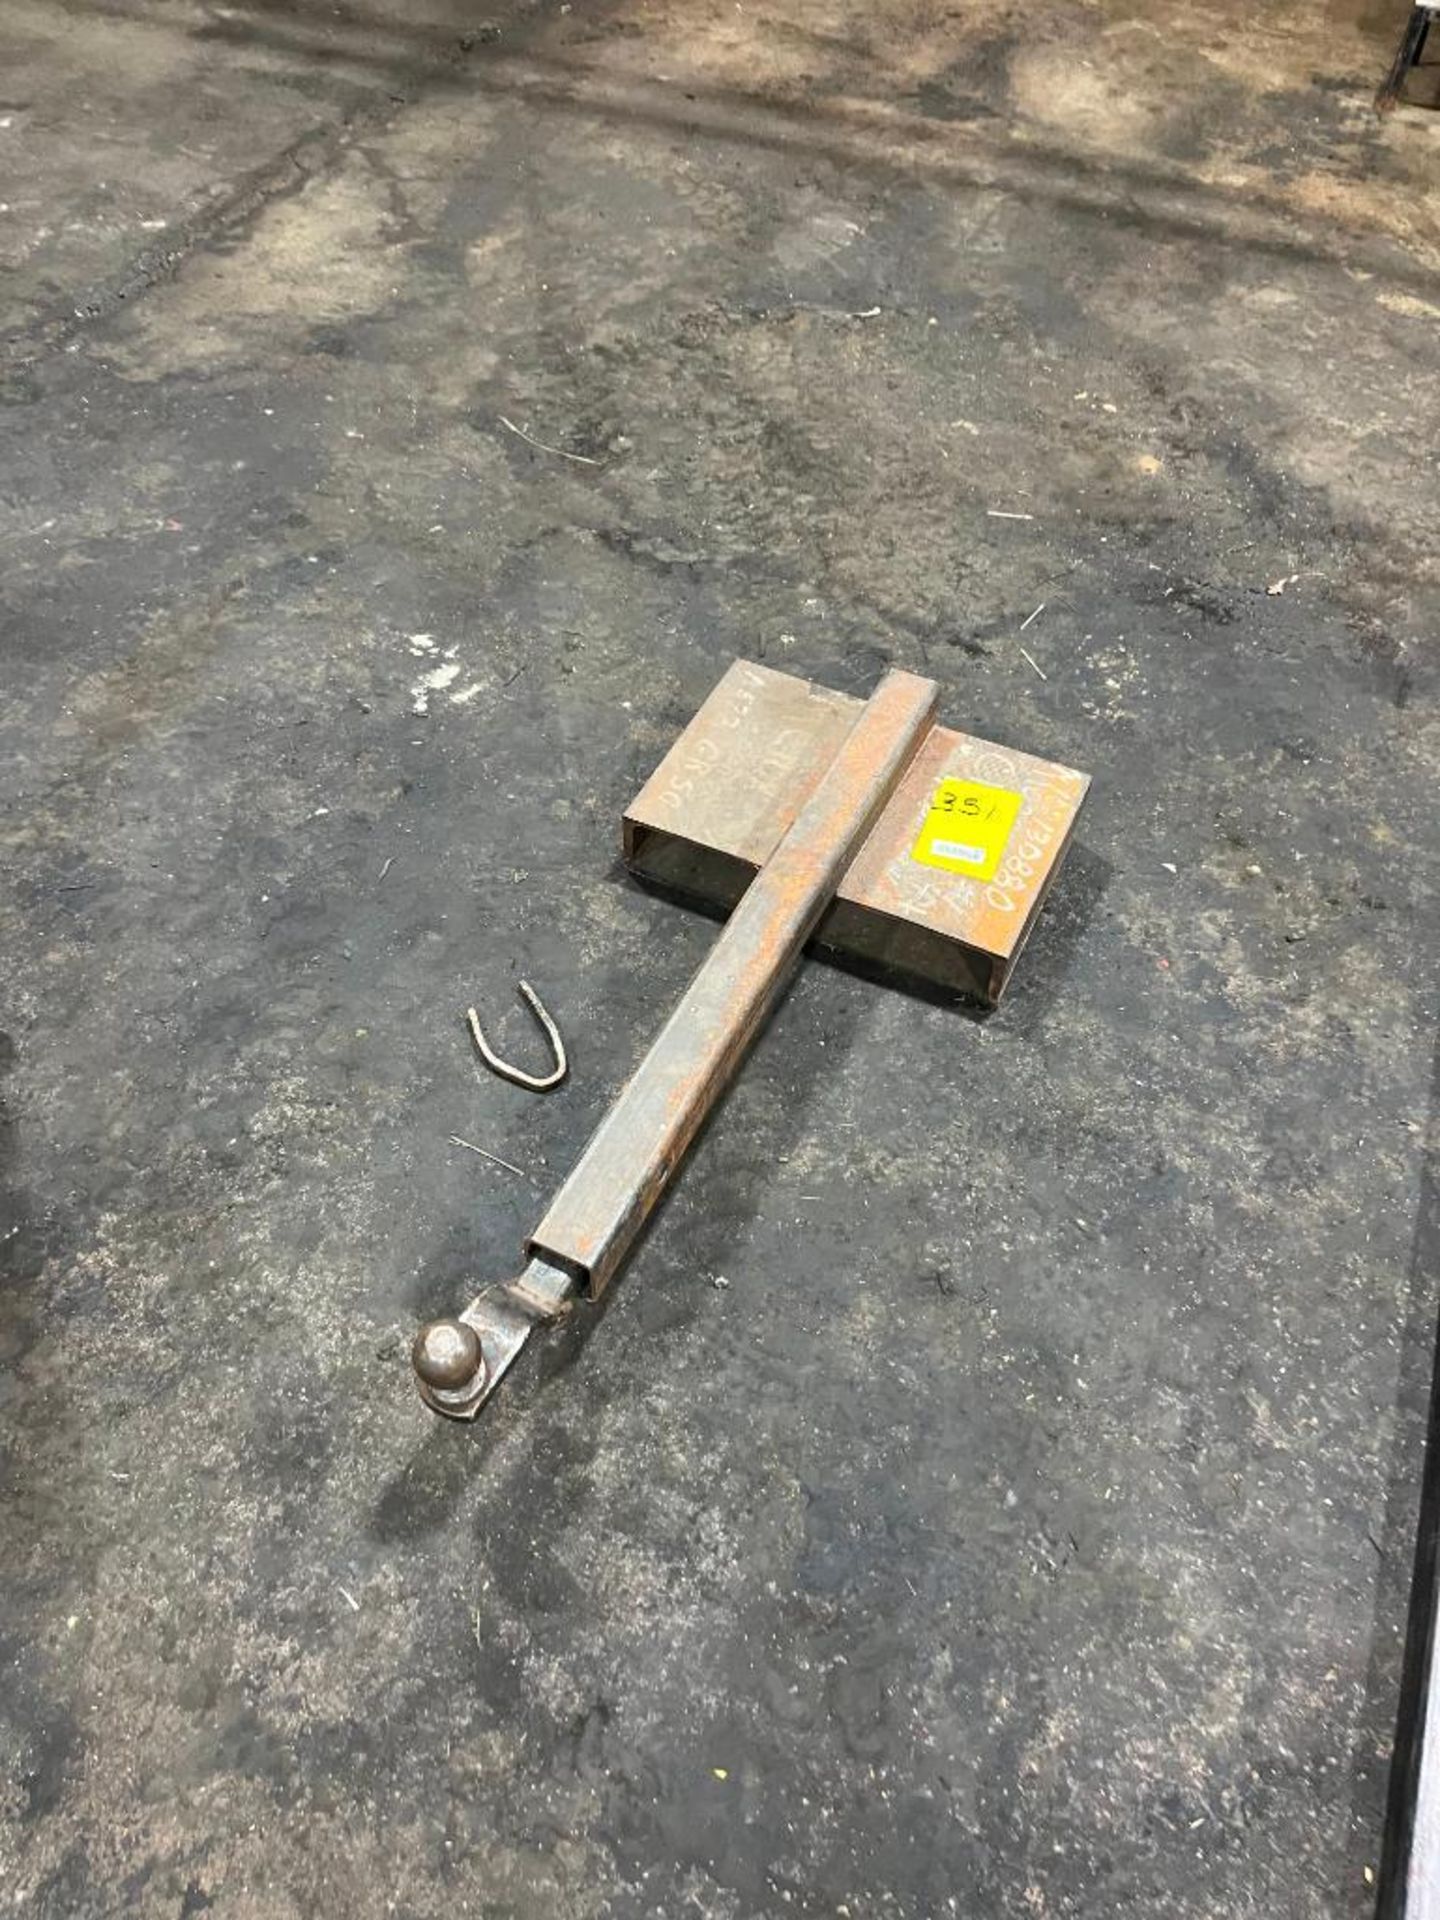 3' TRAILER MOVING FORK ATTACHMENT